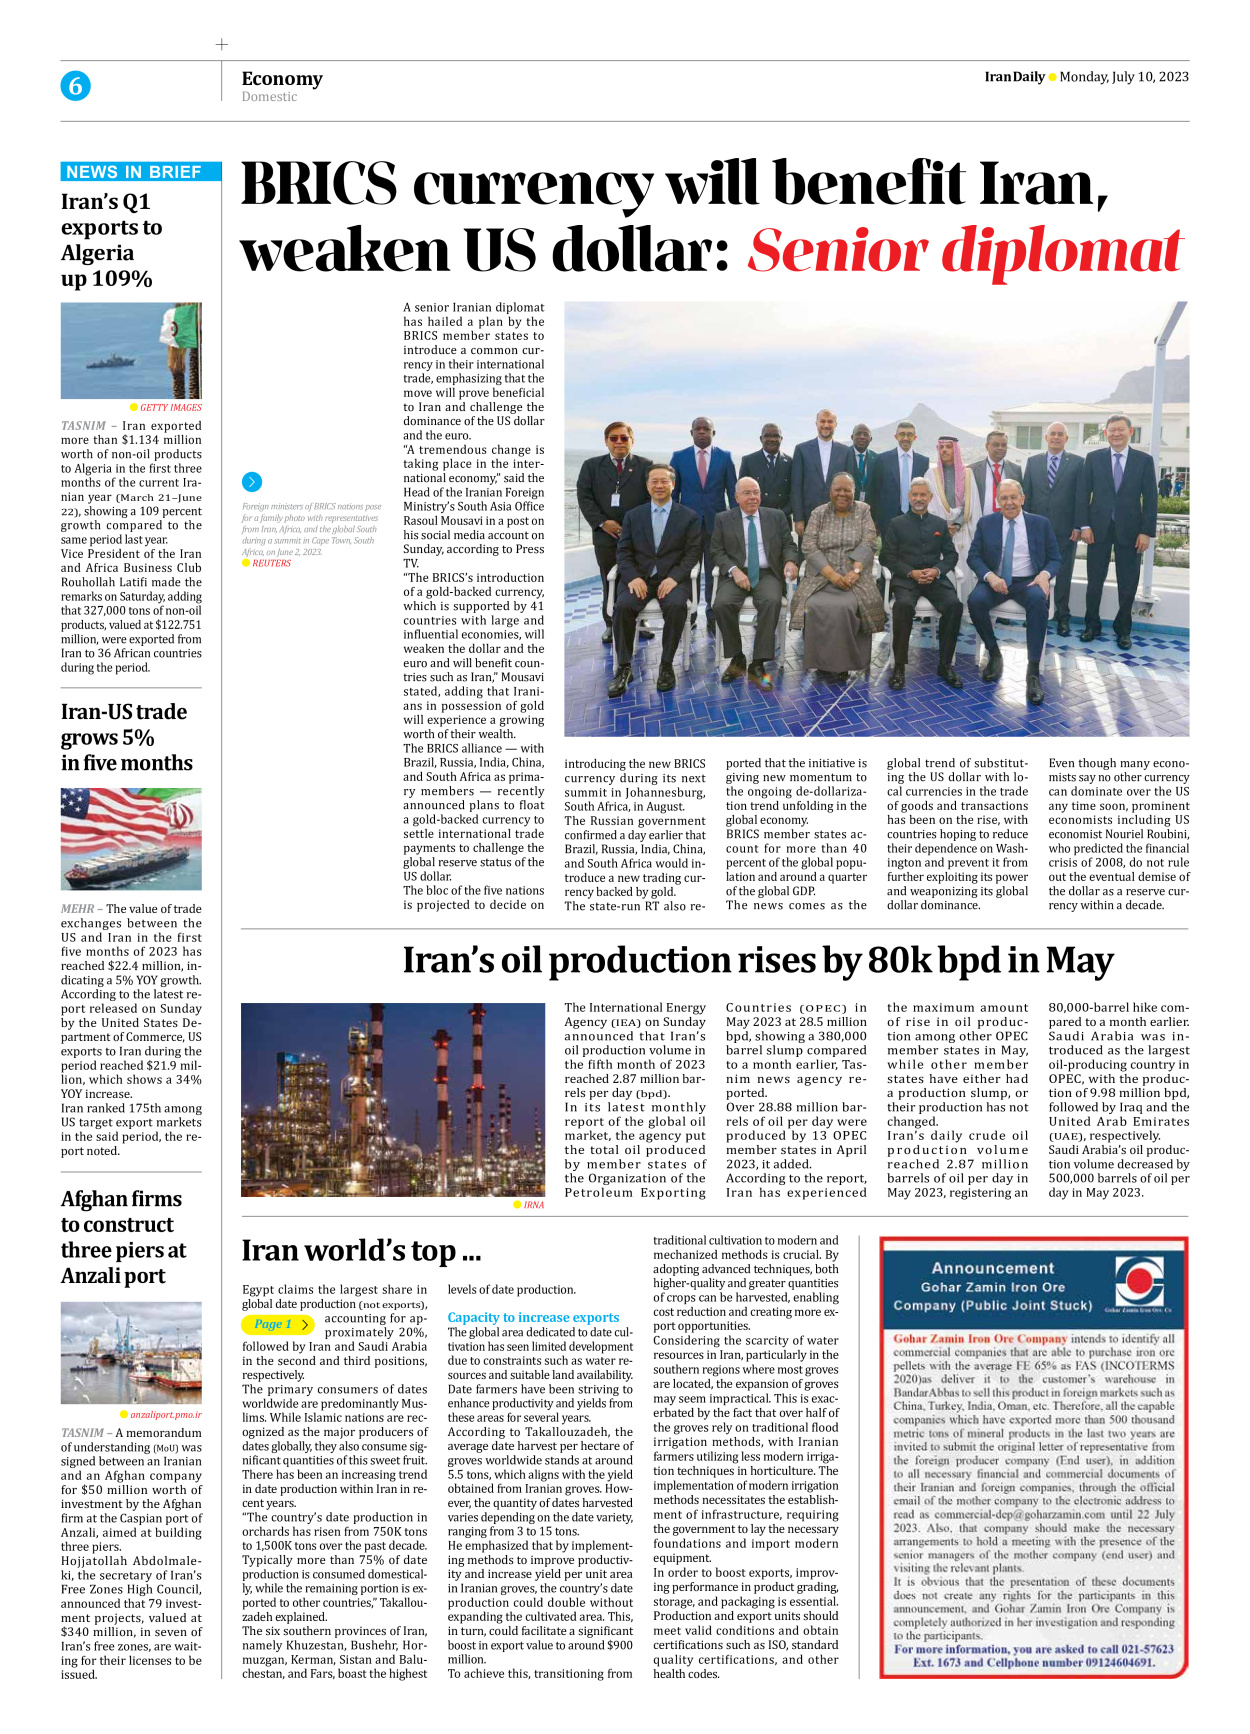 Iran Daily - Number Seven Thousand Three Hundred and Thirty Five - 10 July 2023 - Page 6